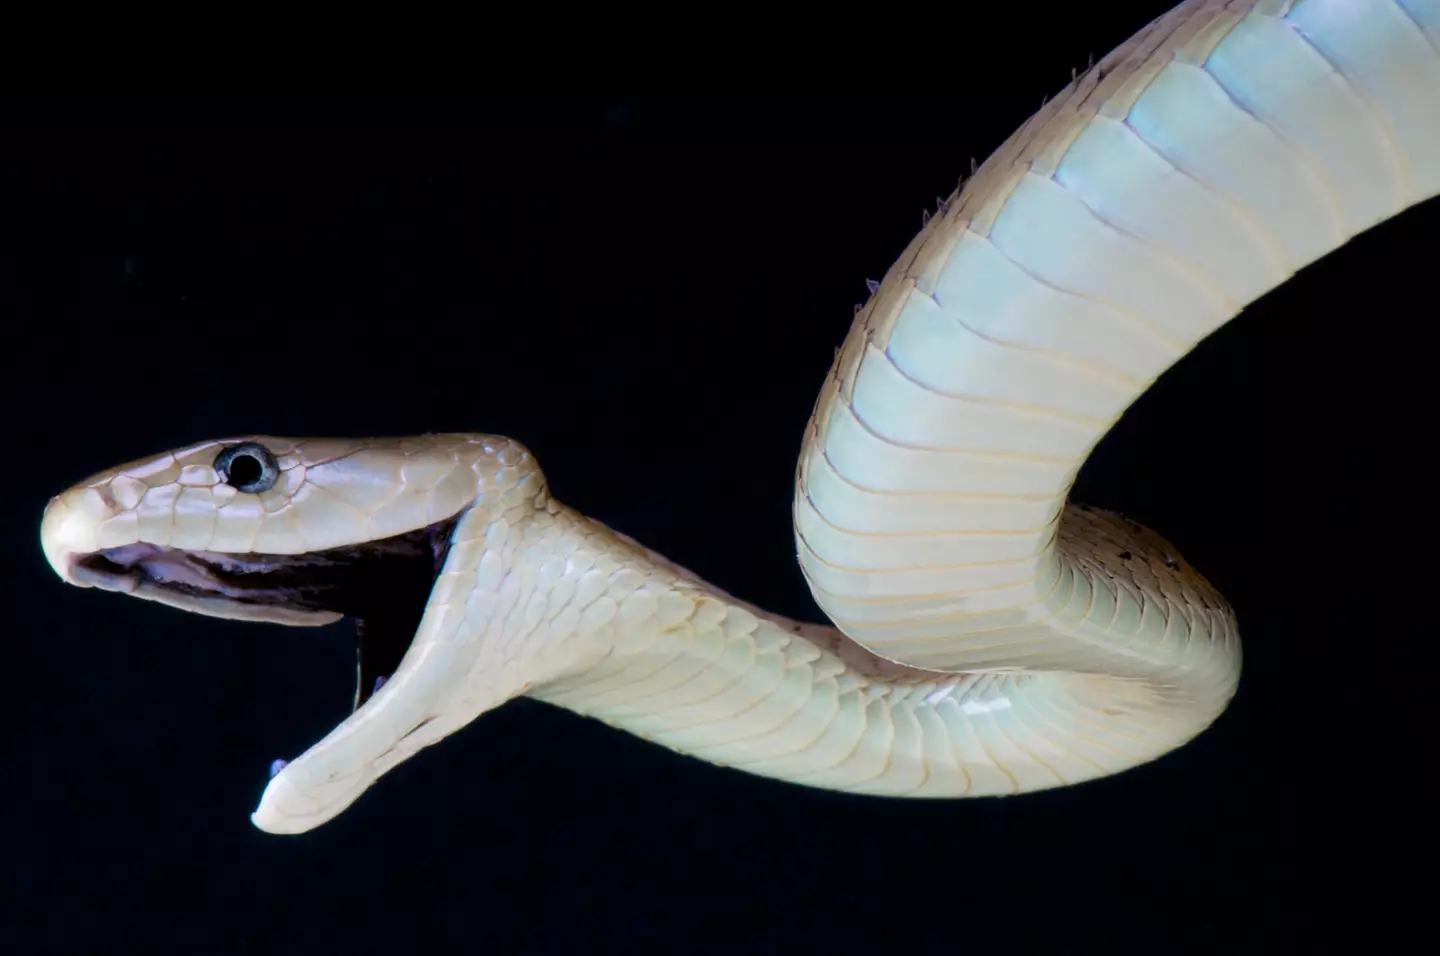 The Black Mamba is one of the world's most dangerous snakes.